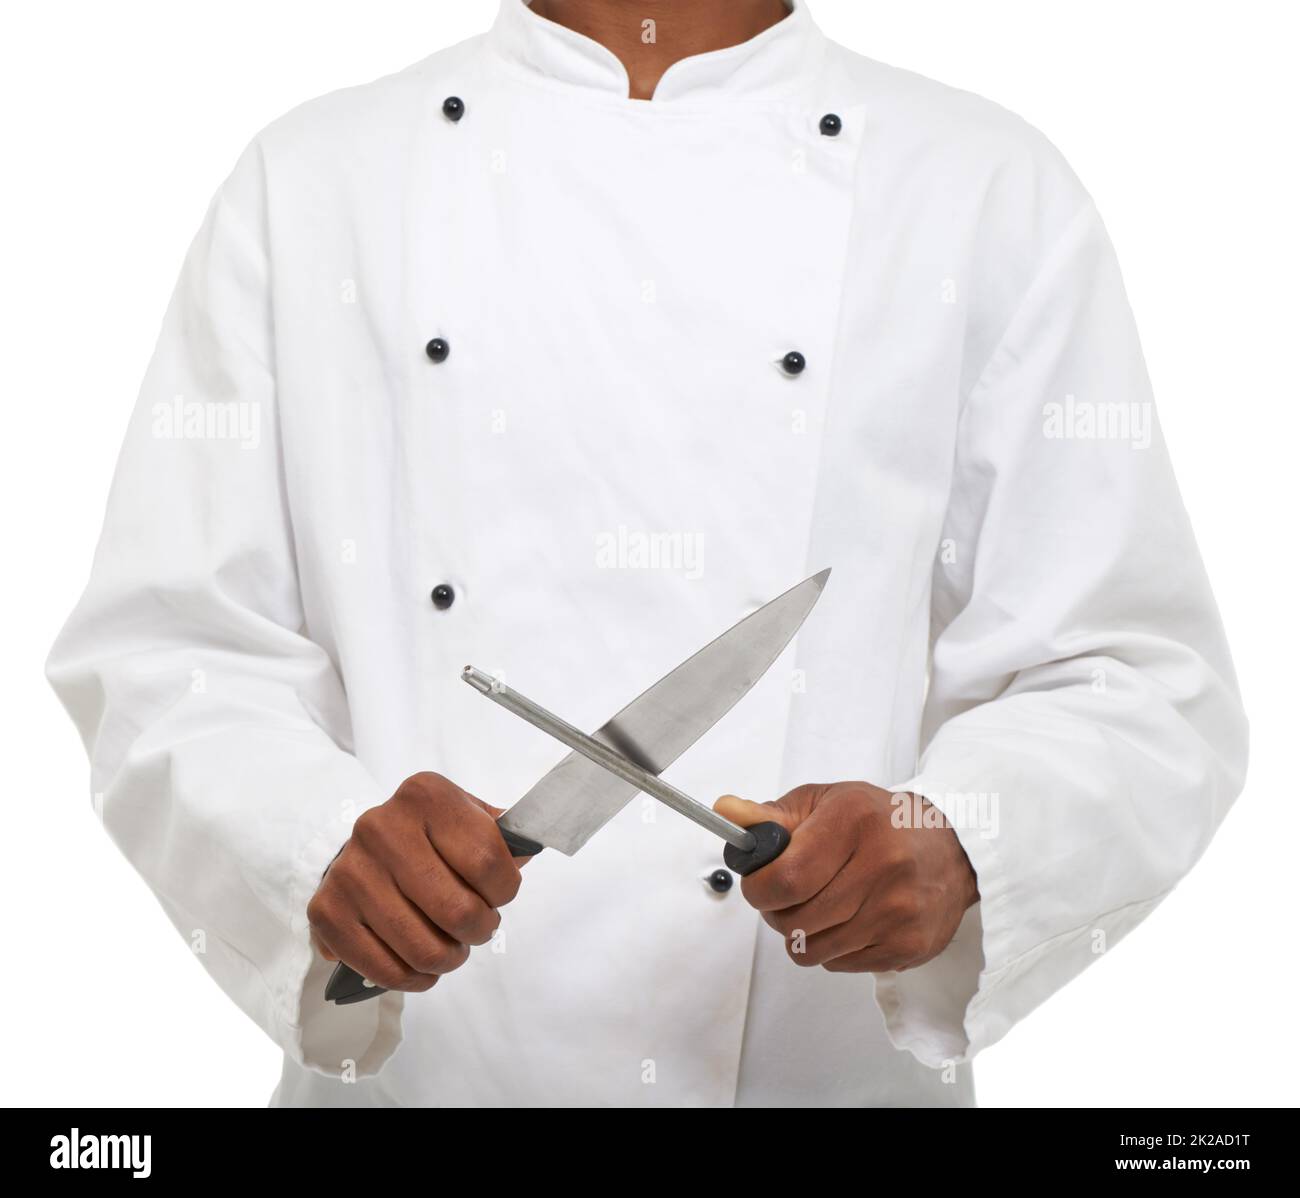 Tools of the trade. A young chef sharpening his knives while isolated on a white background. Stock Photo